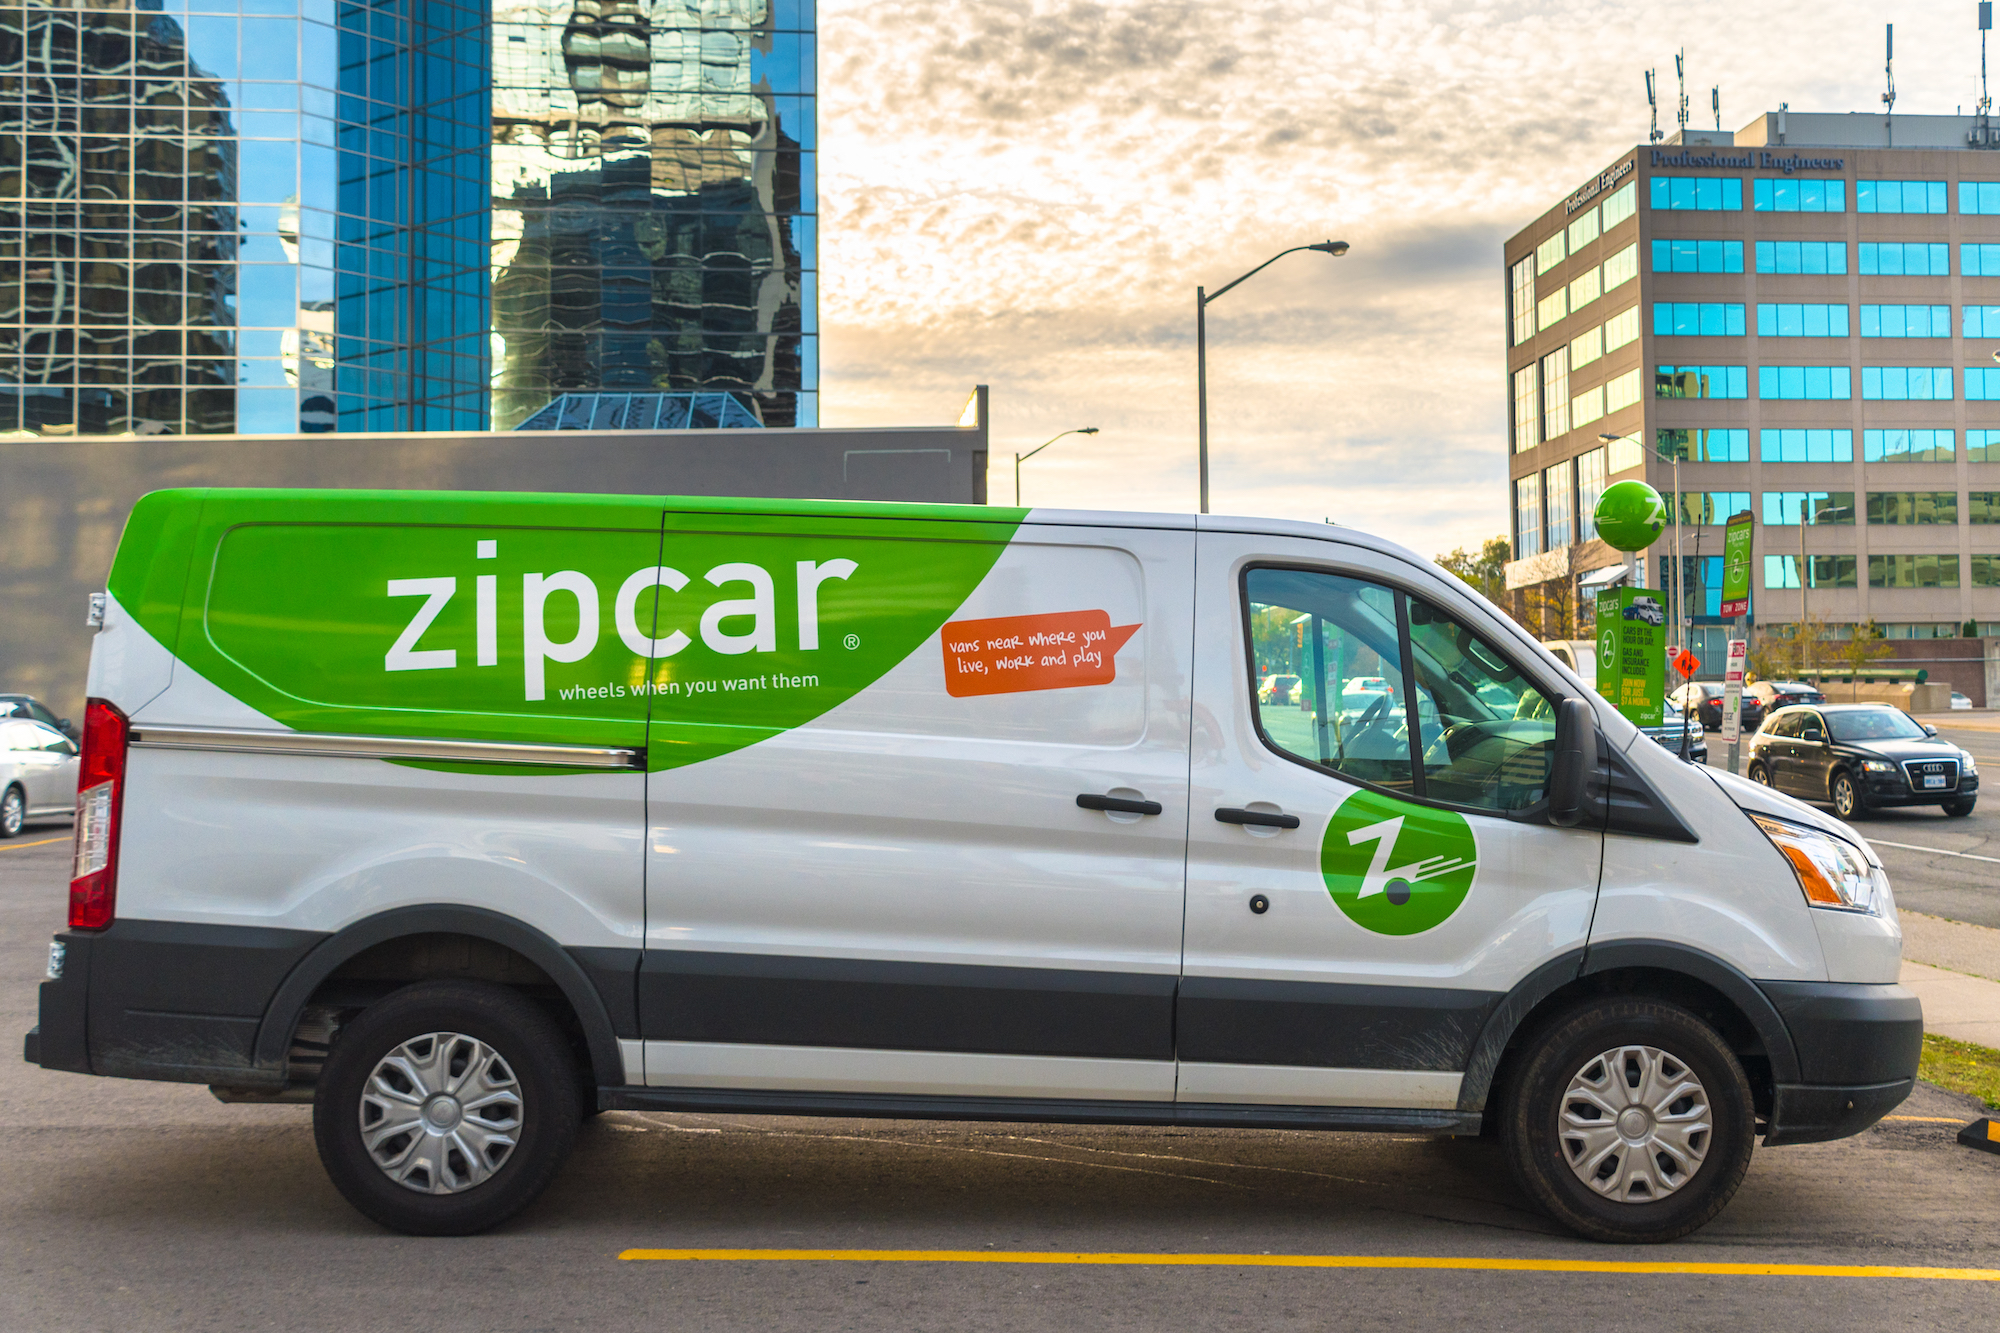 Zipcar rental cars include this white-and-green van parked in a Yonge Street parking lot in Toronto, Ontario, Canada